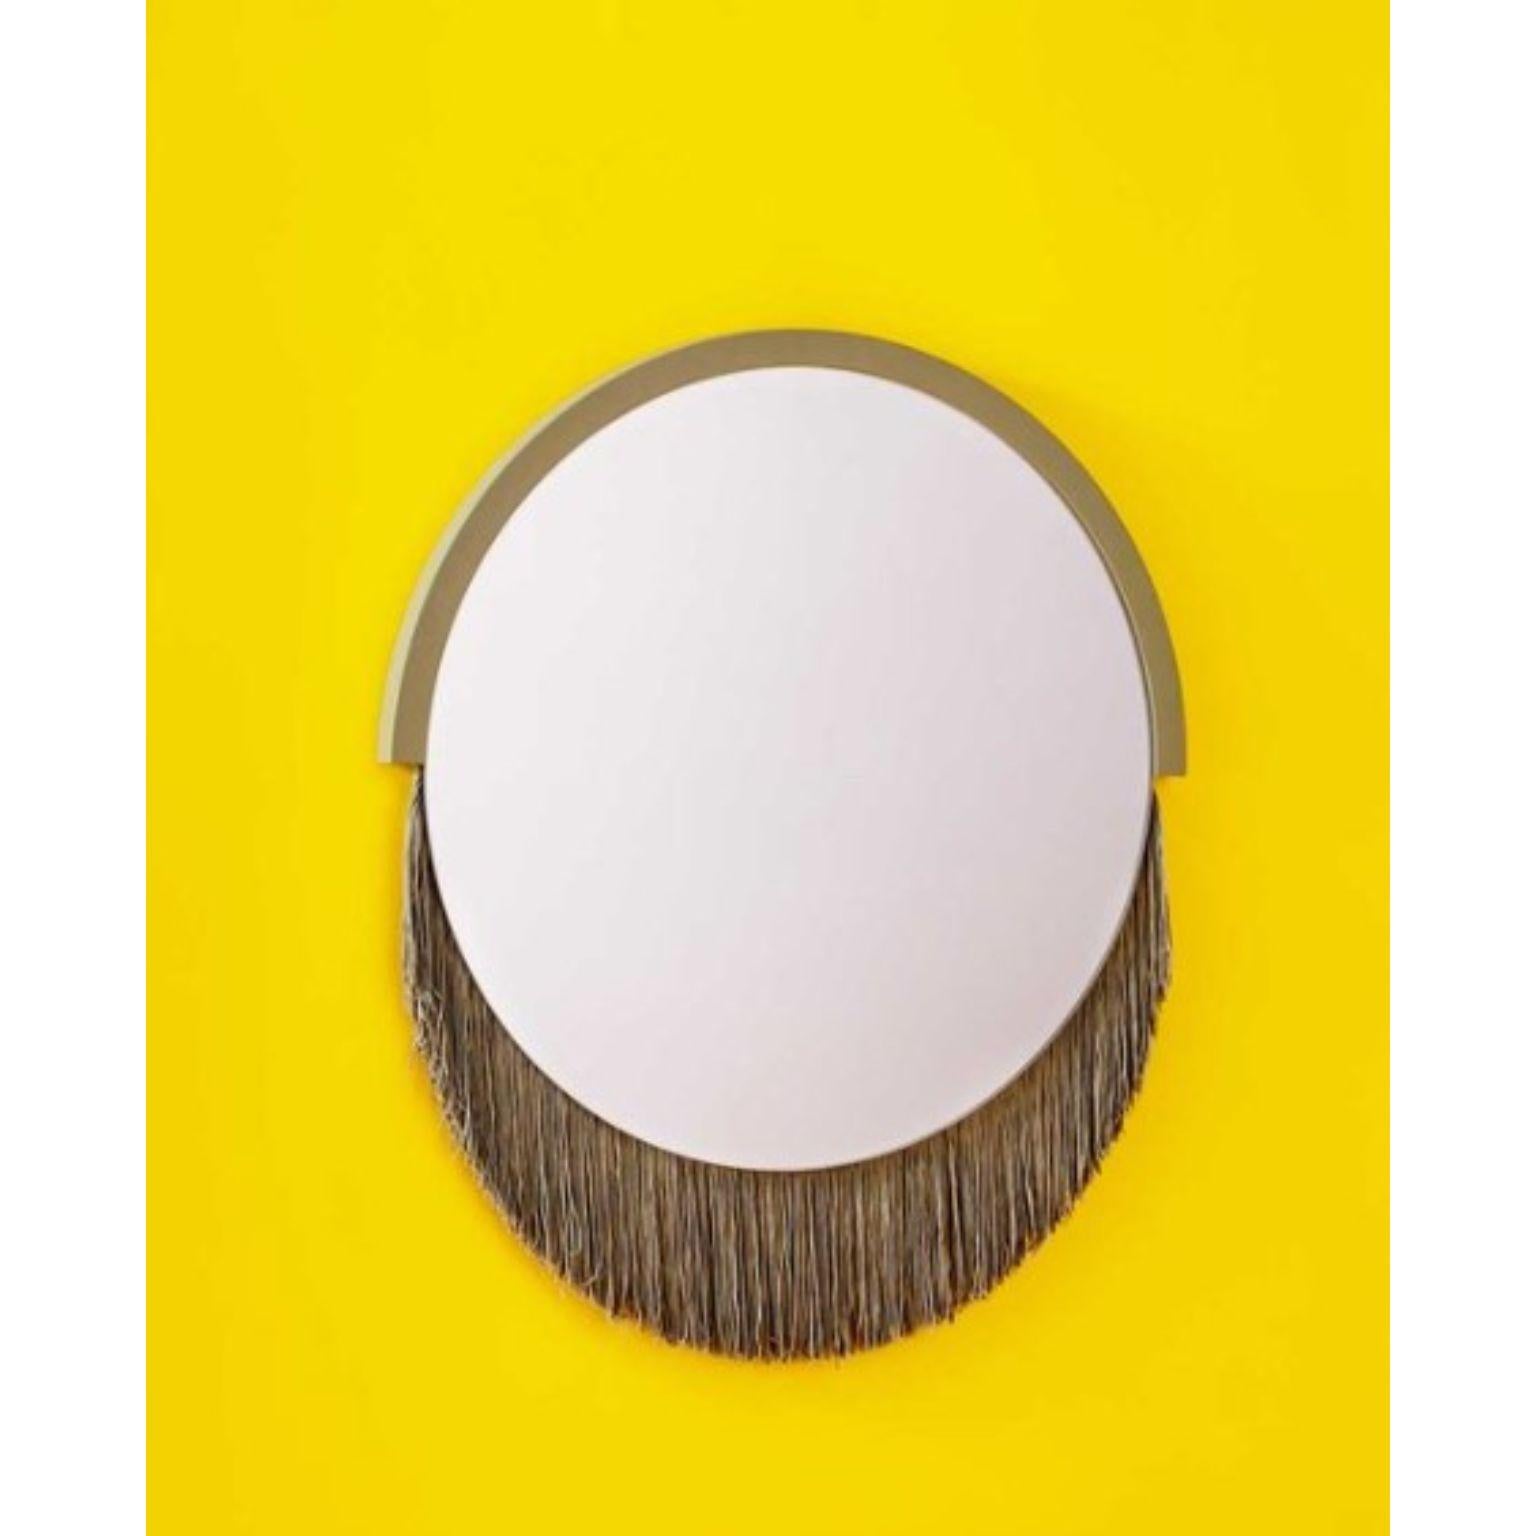 Finnish Boudoir Large Wall Mirror by Tero Kuitunen For Sale